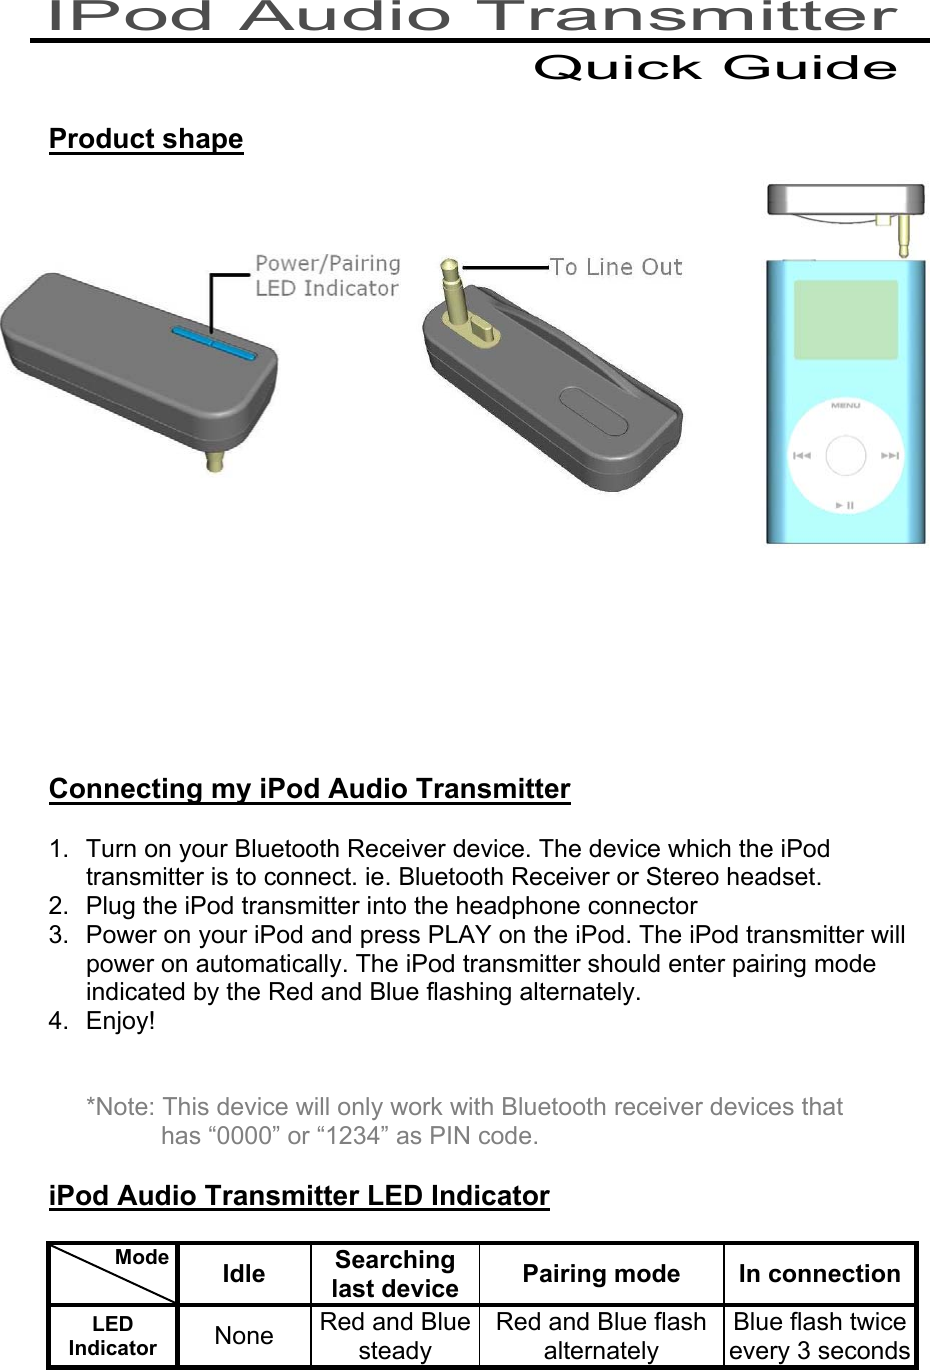    Product shape                 Connecting my iPod Audio Transmitter  1.  Turn on your Bluetooth Receiver device. The device which the iPod transmitter is to connect. ie. Bluetooth Receiver or Stereo headset. 2.  Plug the iPod transmitter into the headphone connector 3.  Power on your iPod and press PLAY on the iPod. The iPod transmitter will power on automatically. The iPod transmitter should enter pairing mode indicated by the Red and Blue flashing alternately. 4. Enjoy!   *Note: This device will only work with Bluetooth receiver devices that has “0000” or “1234” as PIN code.  iPod Audio Transmitter LED Indicator            Mode    Idle  Searching last device  Pairing mode  In connectionLED Indicator  None  Red and Blue steady Red and Blue flash alternately Blue flash twice every 3 seconds   IPod Audio Transmitter Quick Guide 